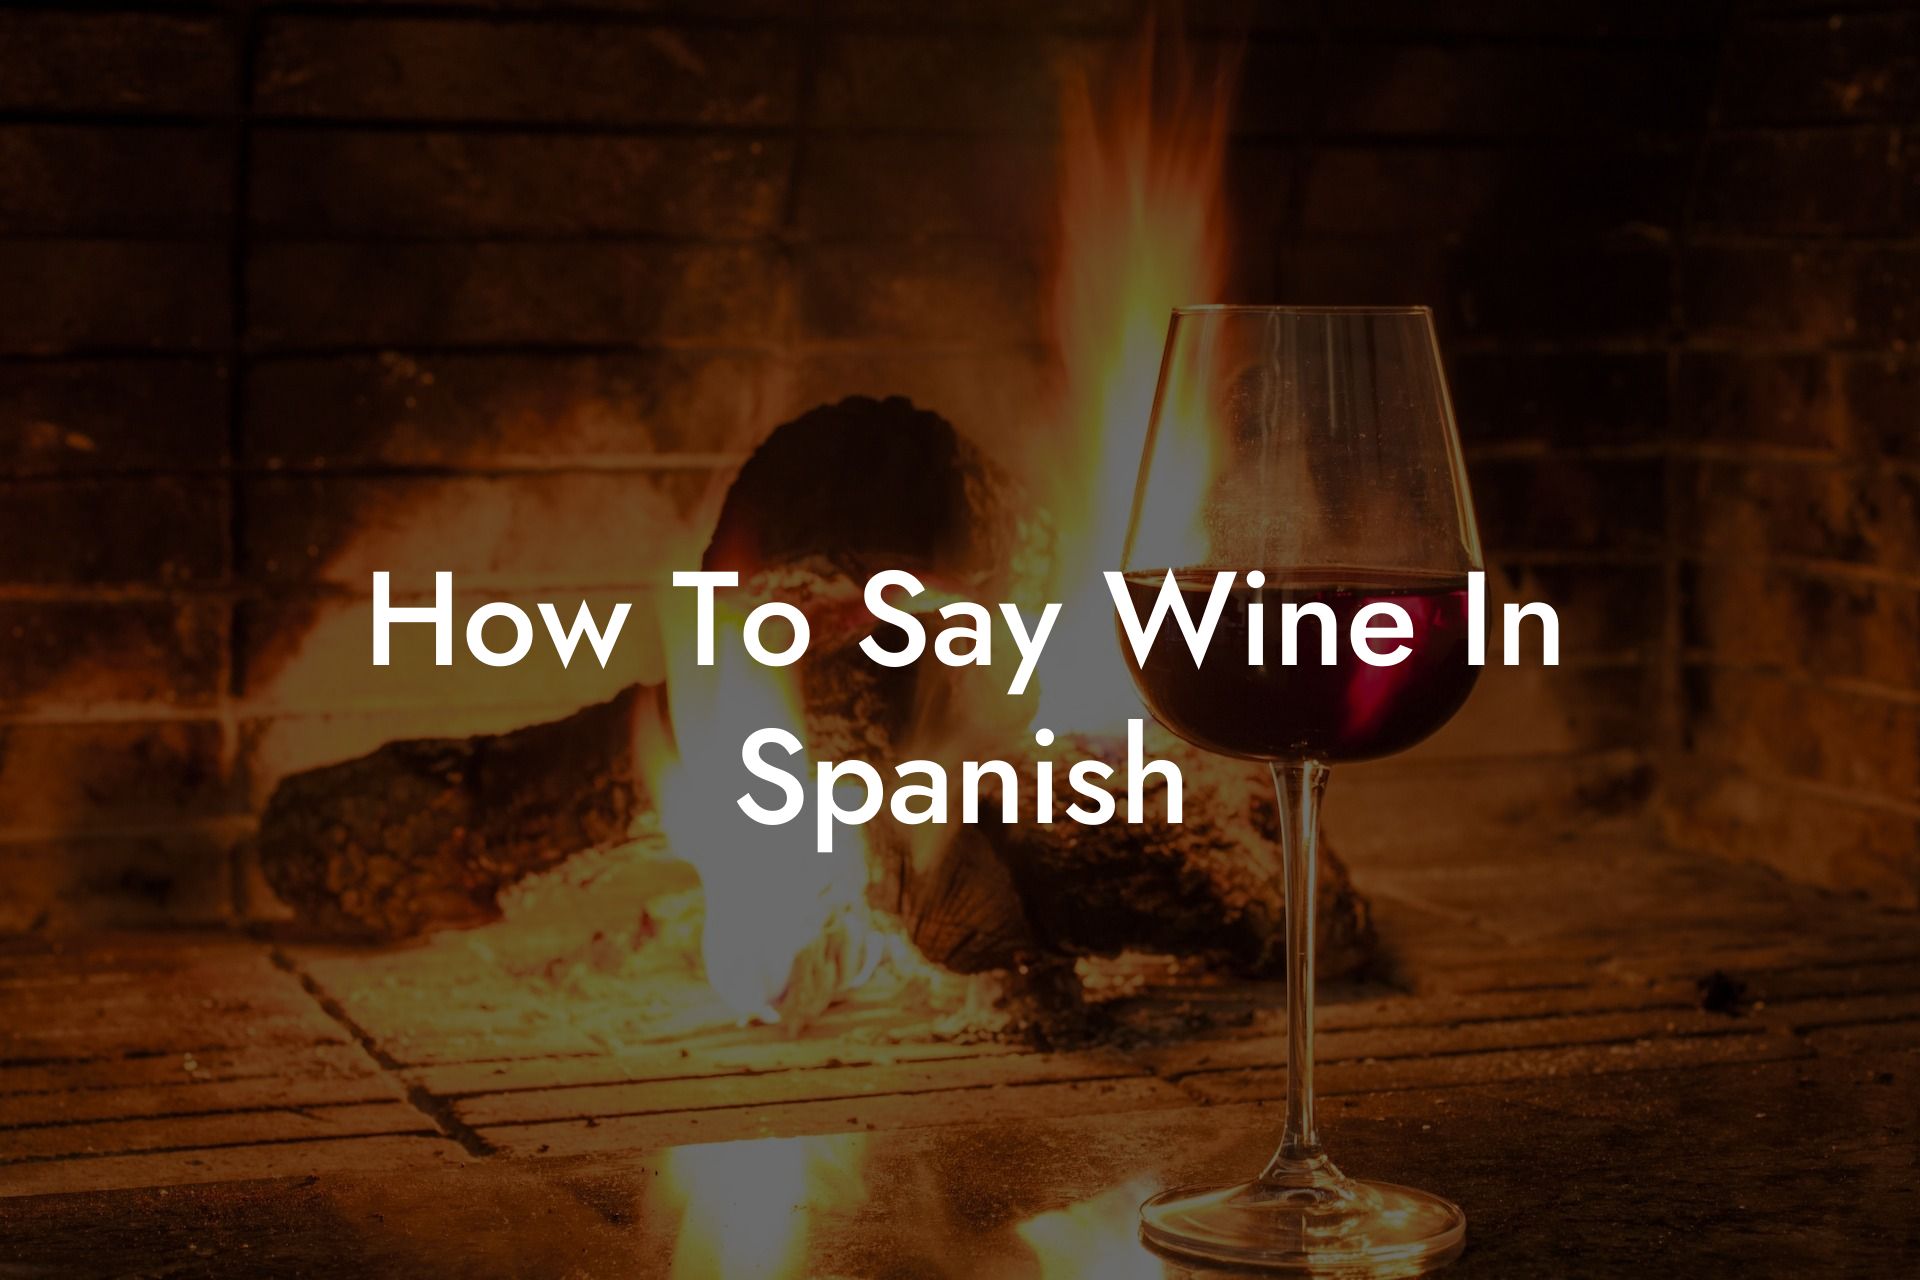 How To Say Wine In Spanish